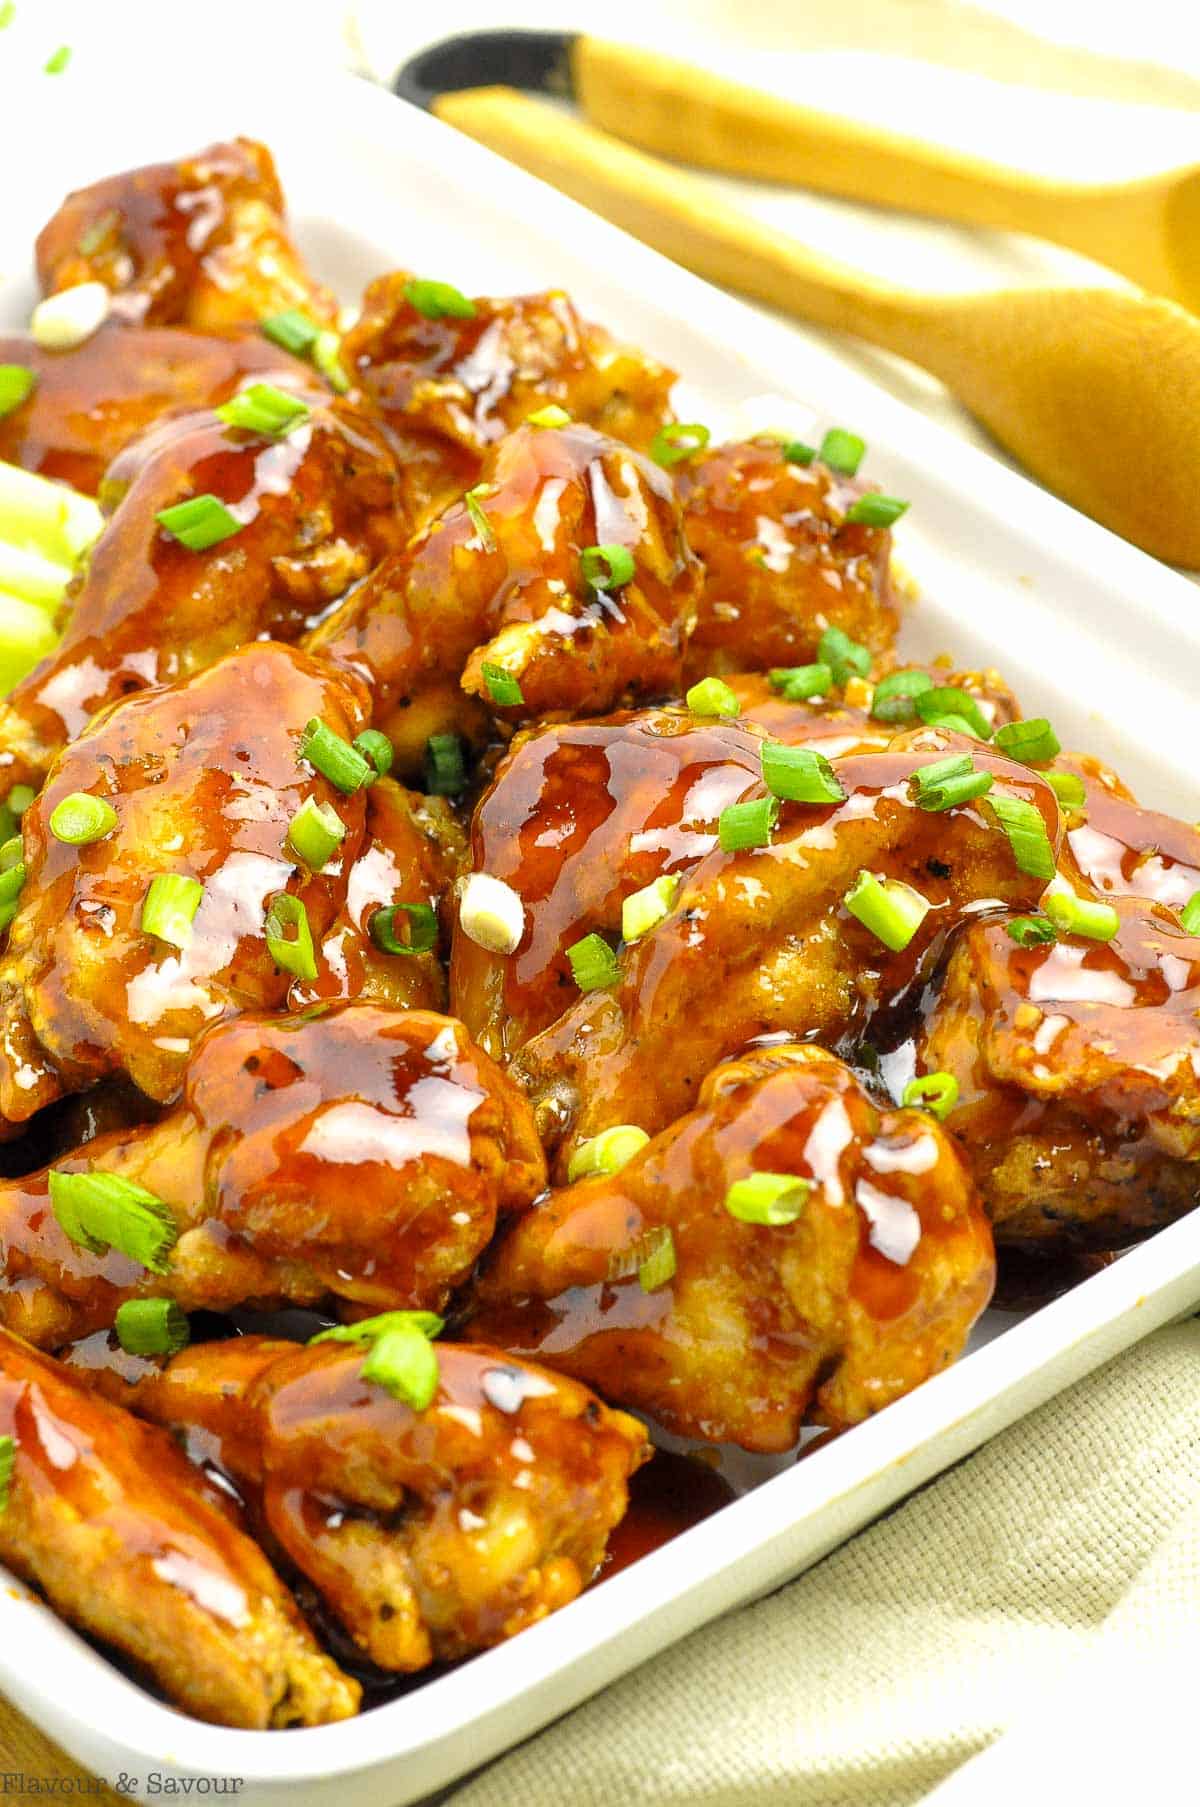 Chicken wings tossed with honey garlic sauce.